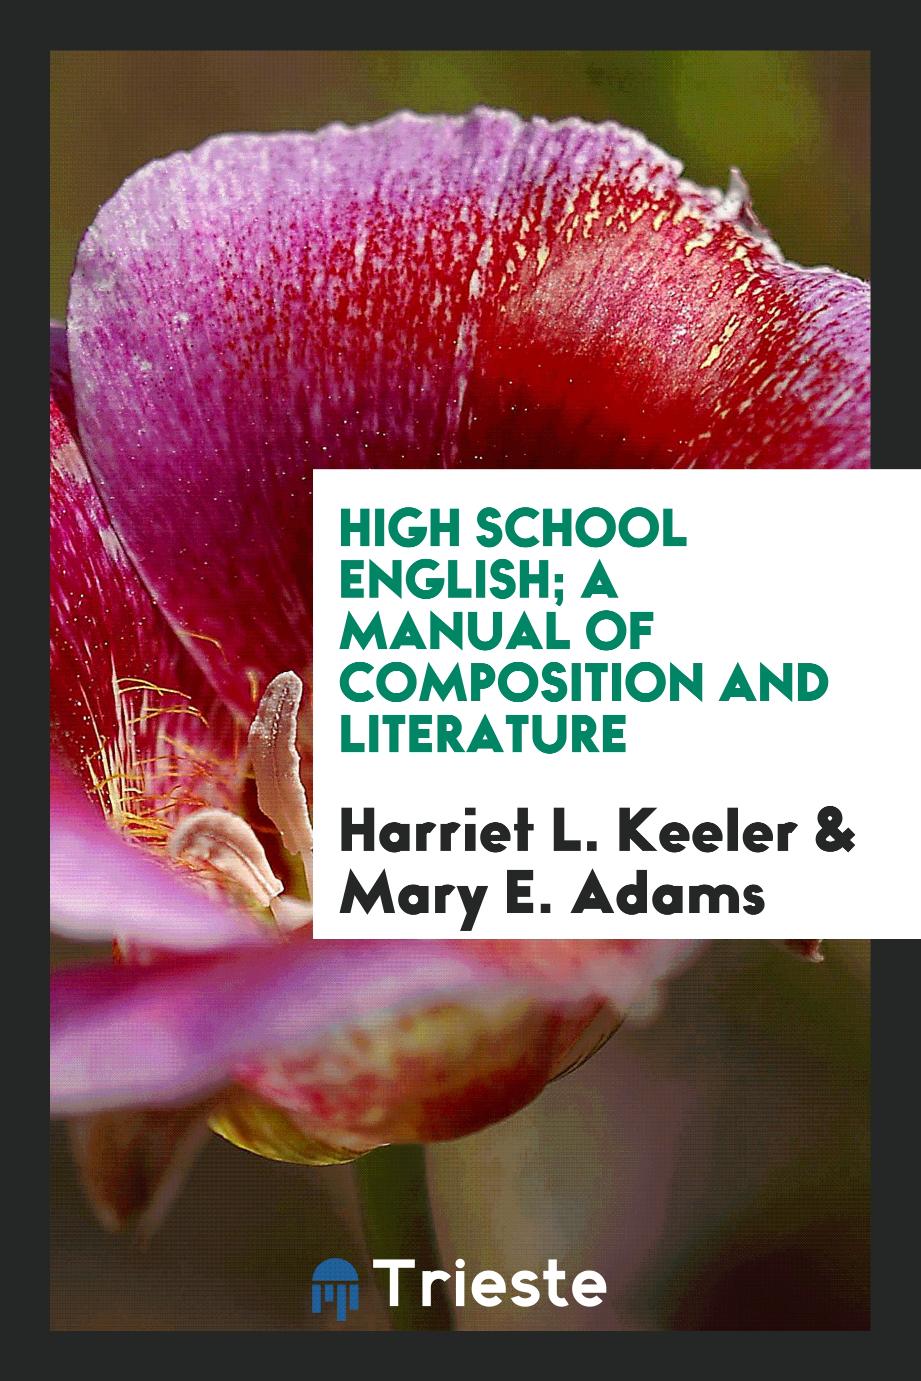 High school English; a manual of composition and literature